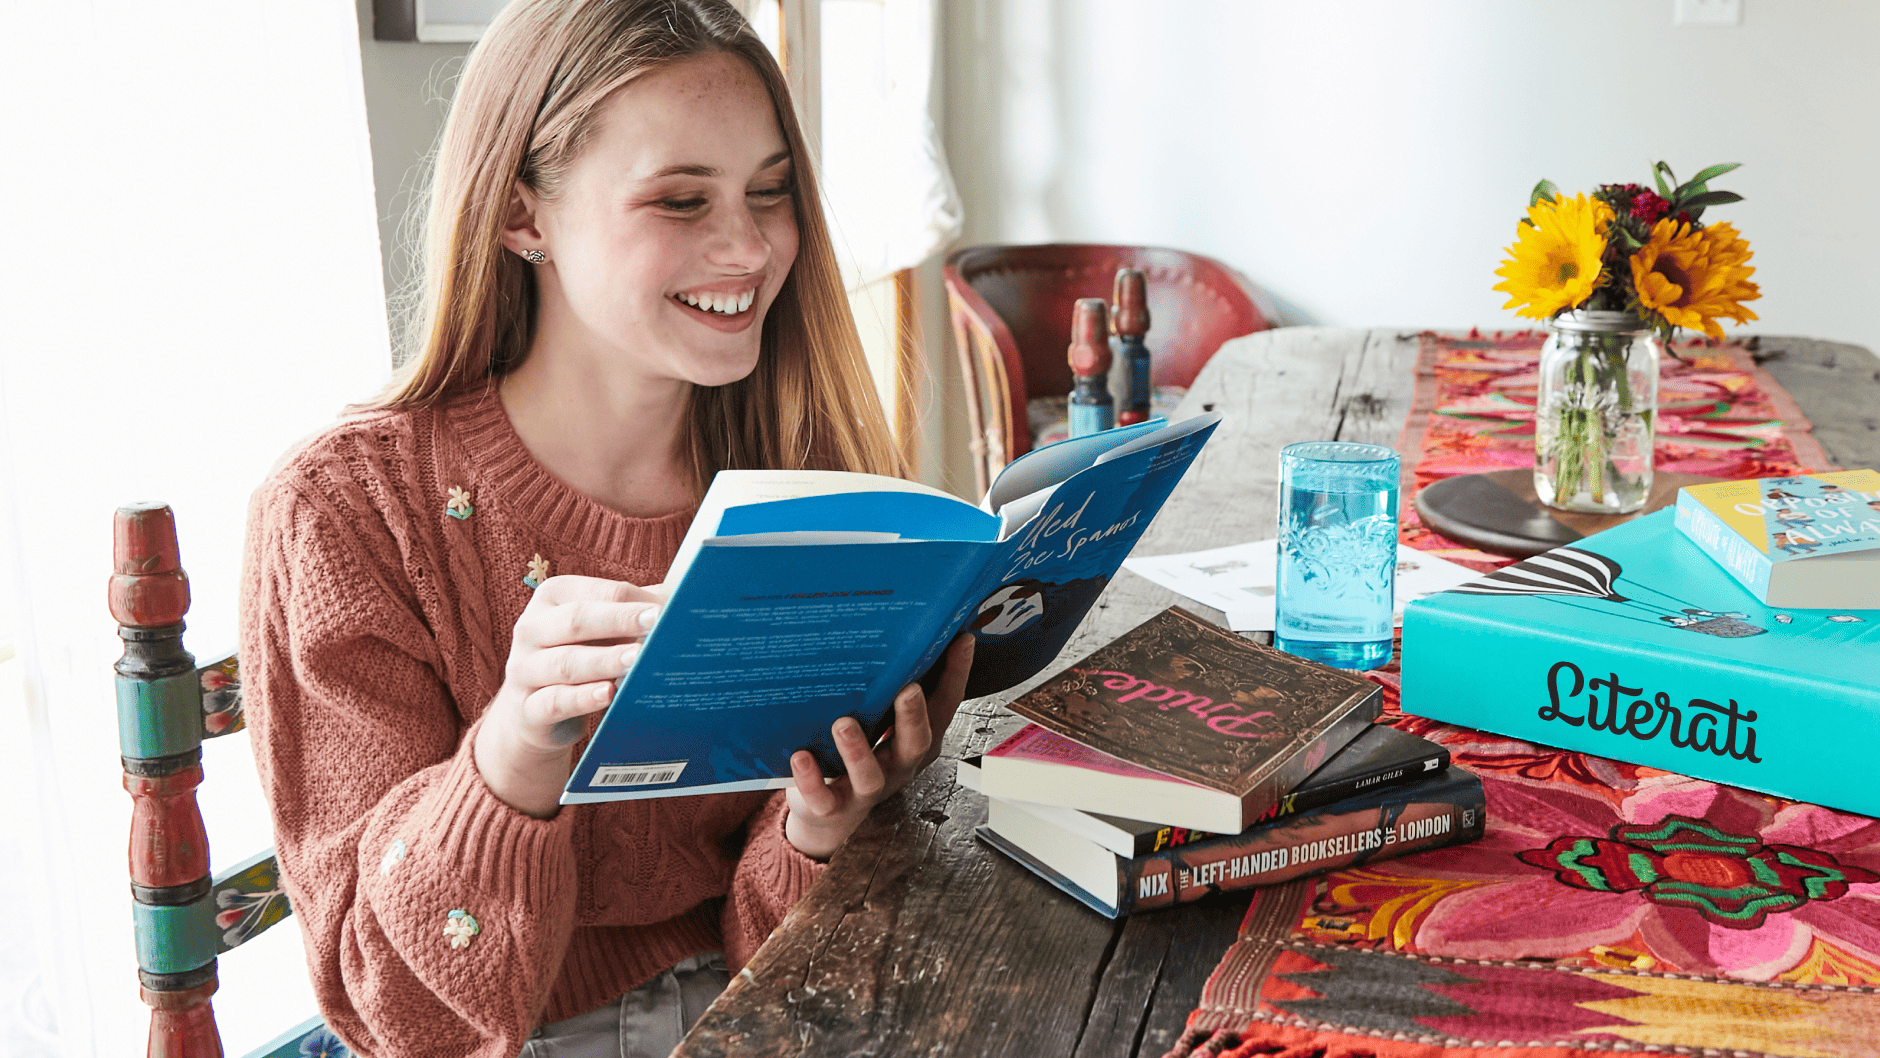 The Best Books for Ninth Graders